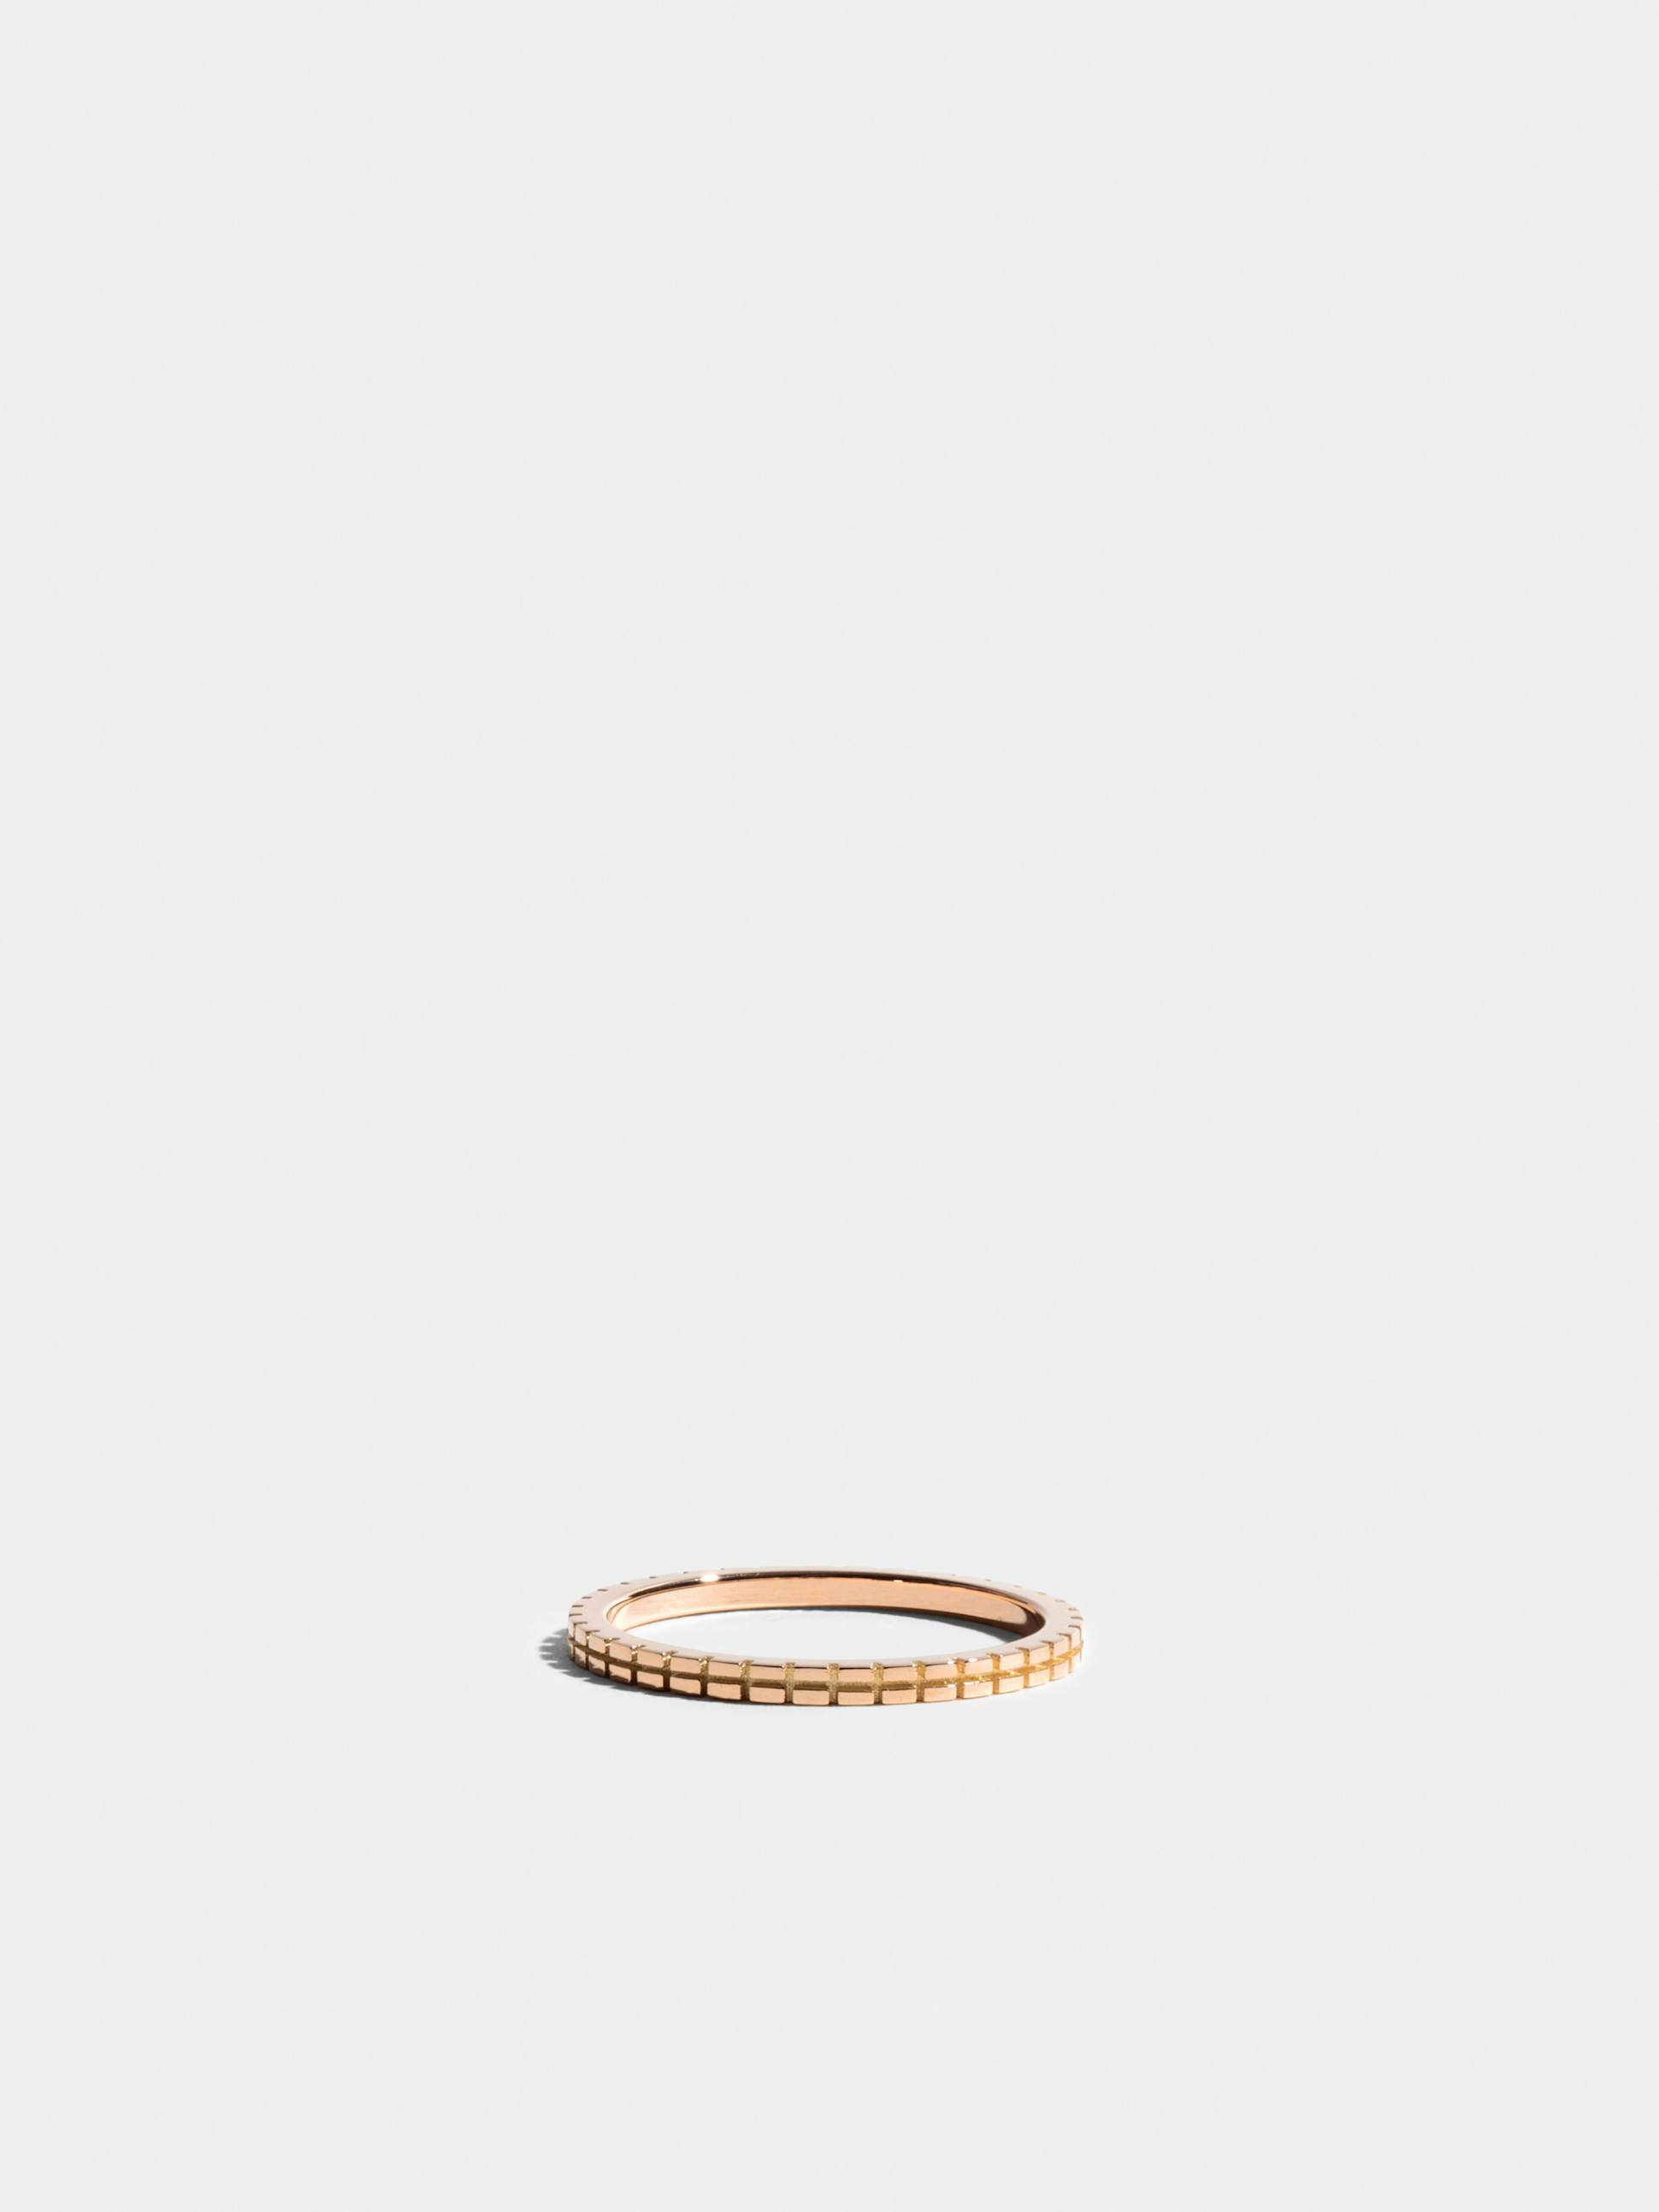 Anagramme "damier" ring in 18k Fairmined ethical pink gold